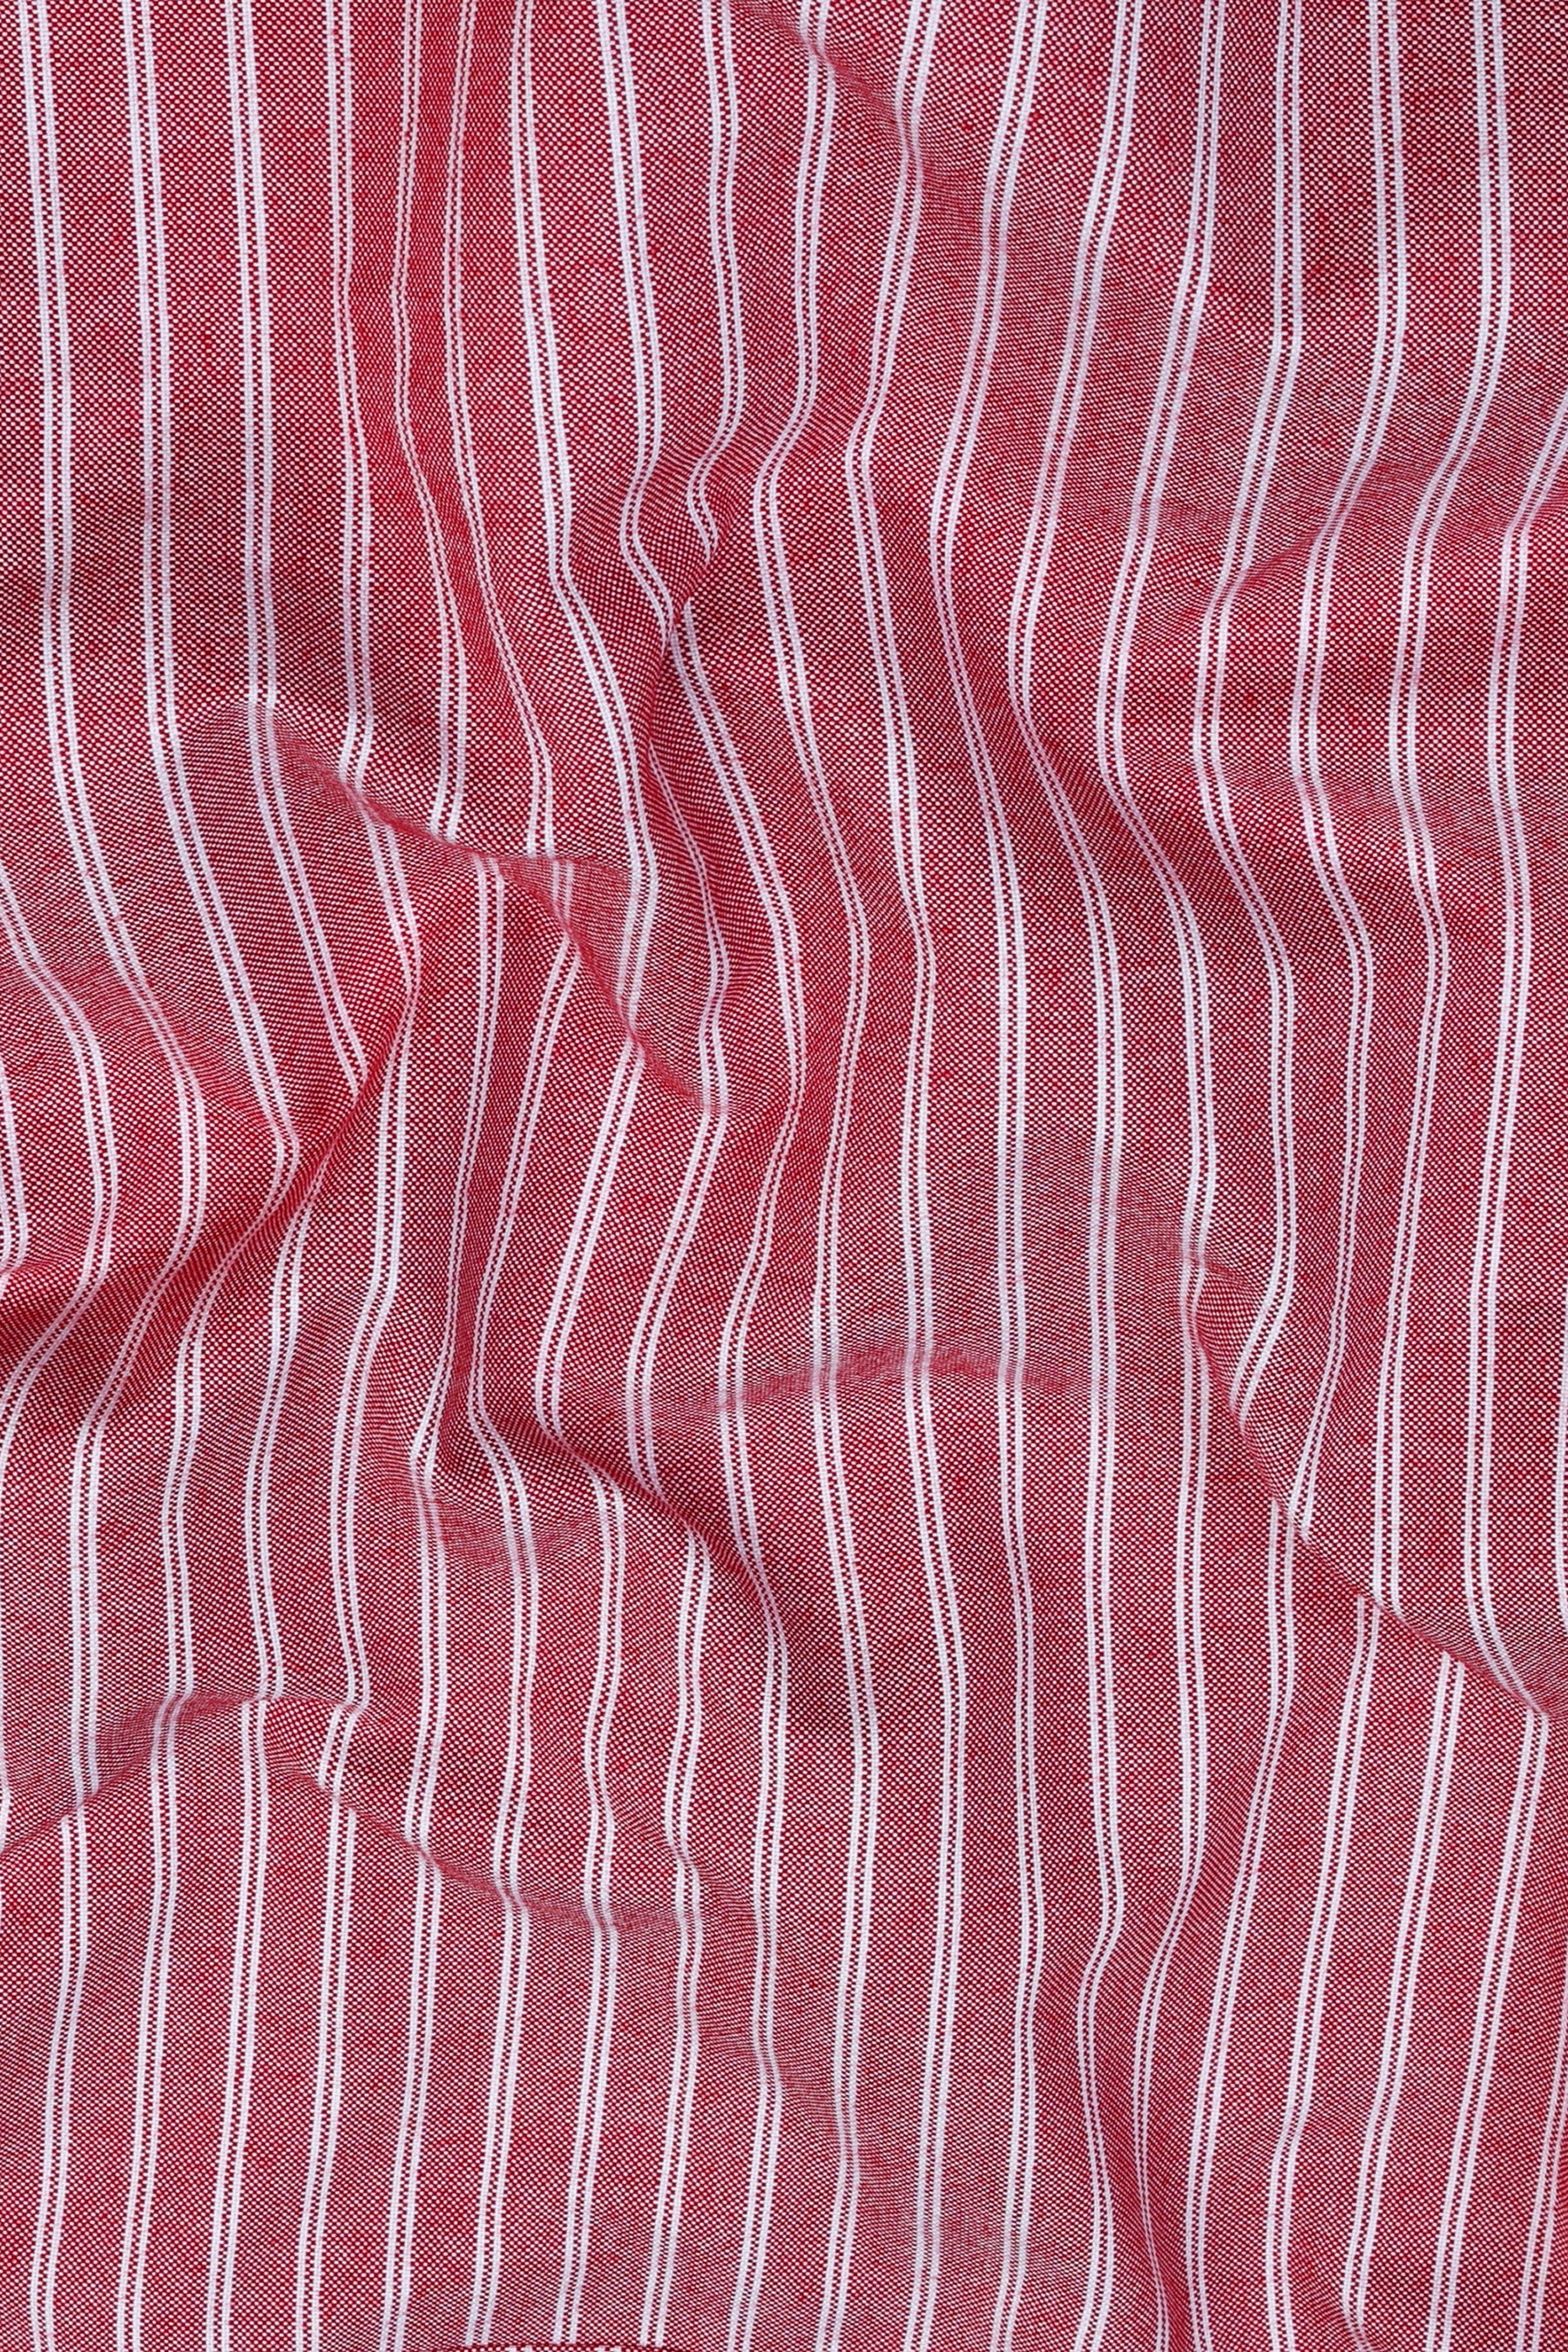 Cardinal red with white double line regency stripe shirt